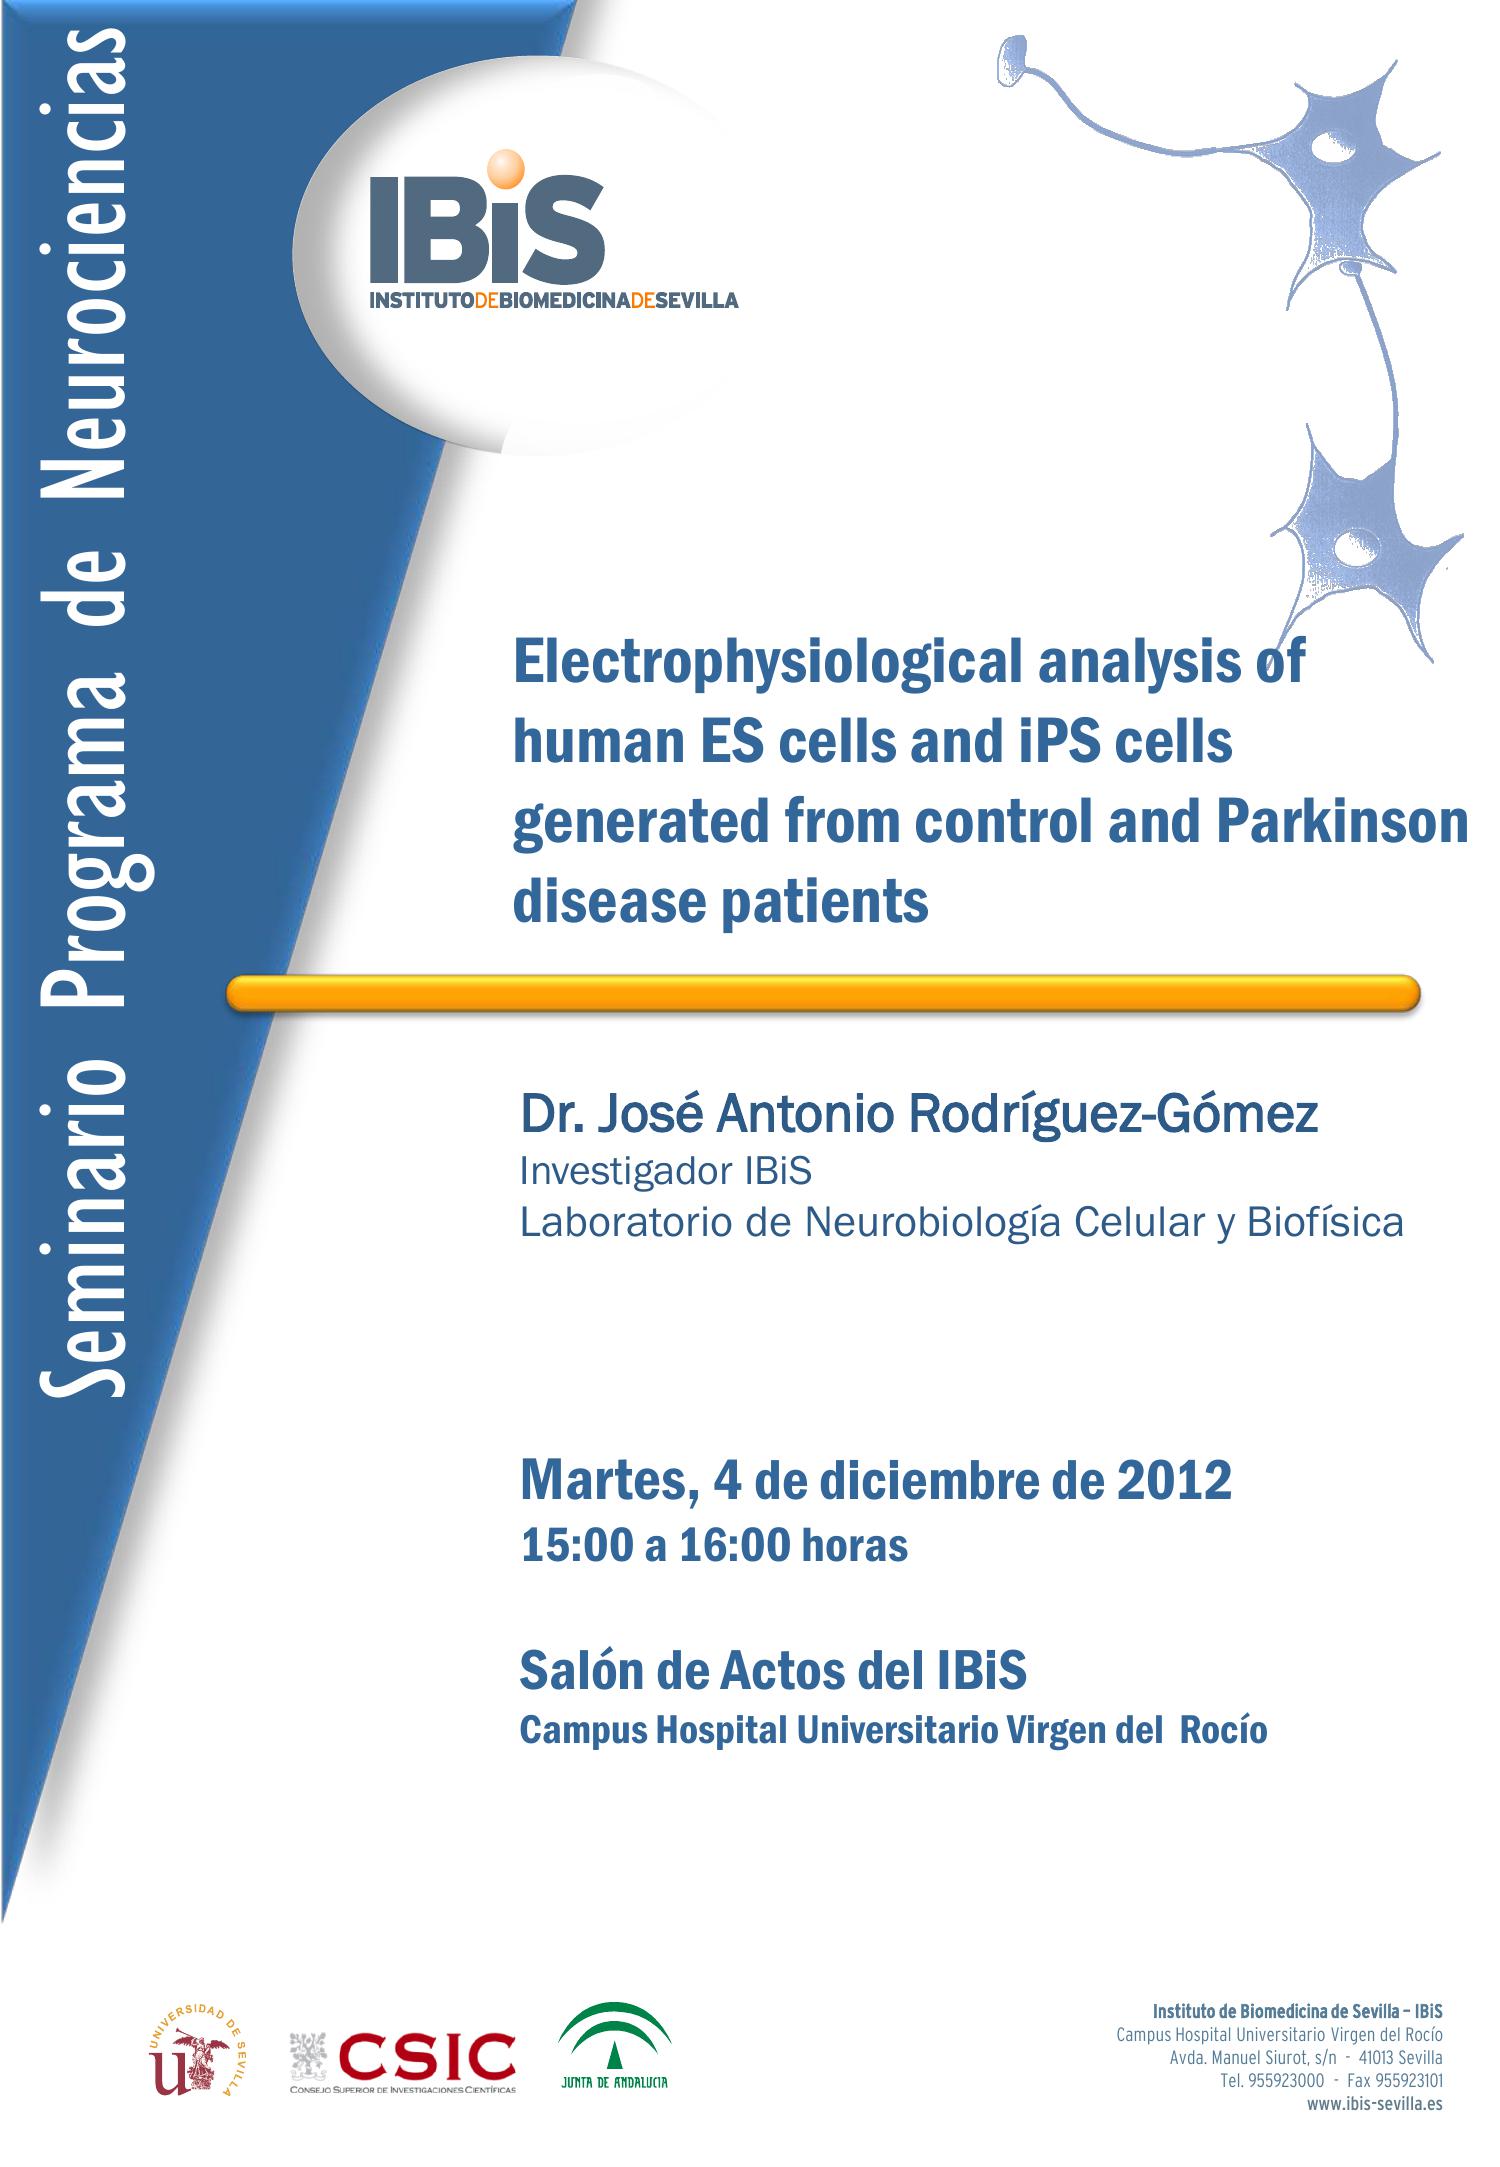 Poster: Electrophysiological analysis of human ES cells and iPS cells generated from control and Parkinson disease patients.